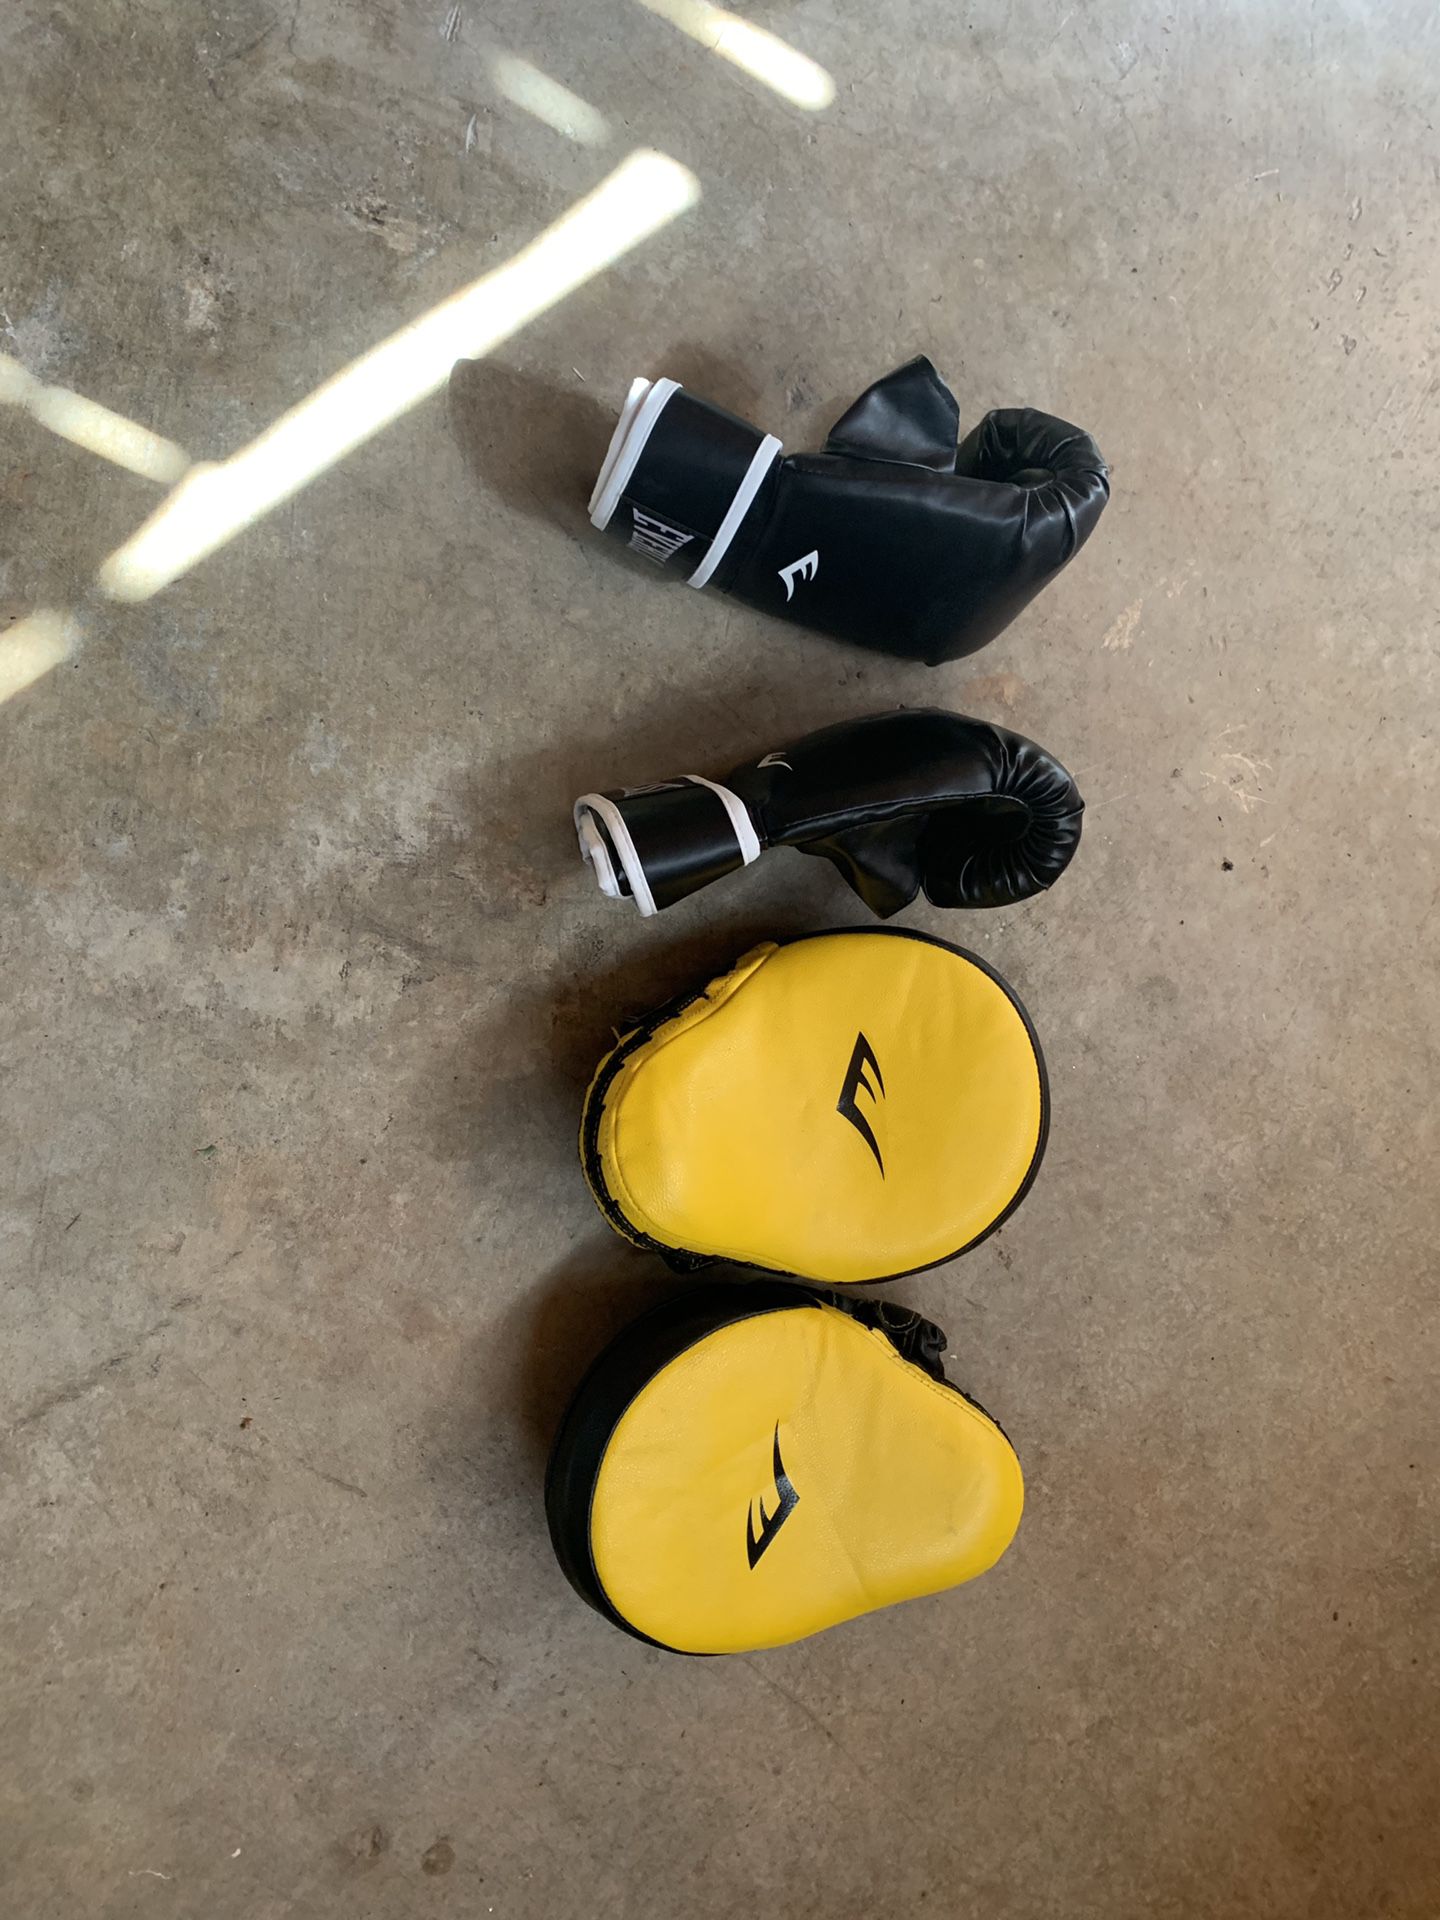 Everlast Punching bag and 3 different sets of boxing gloves